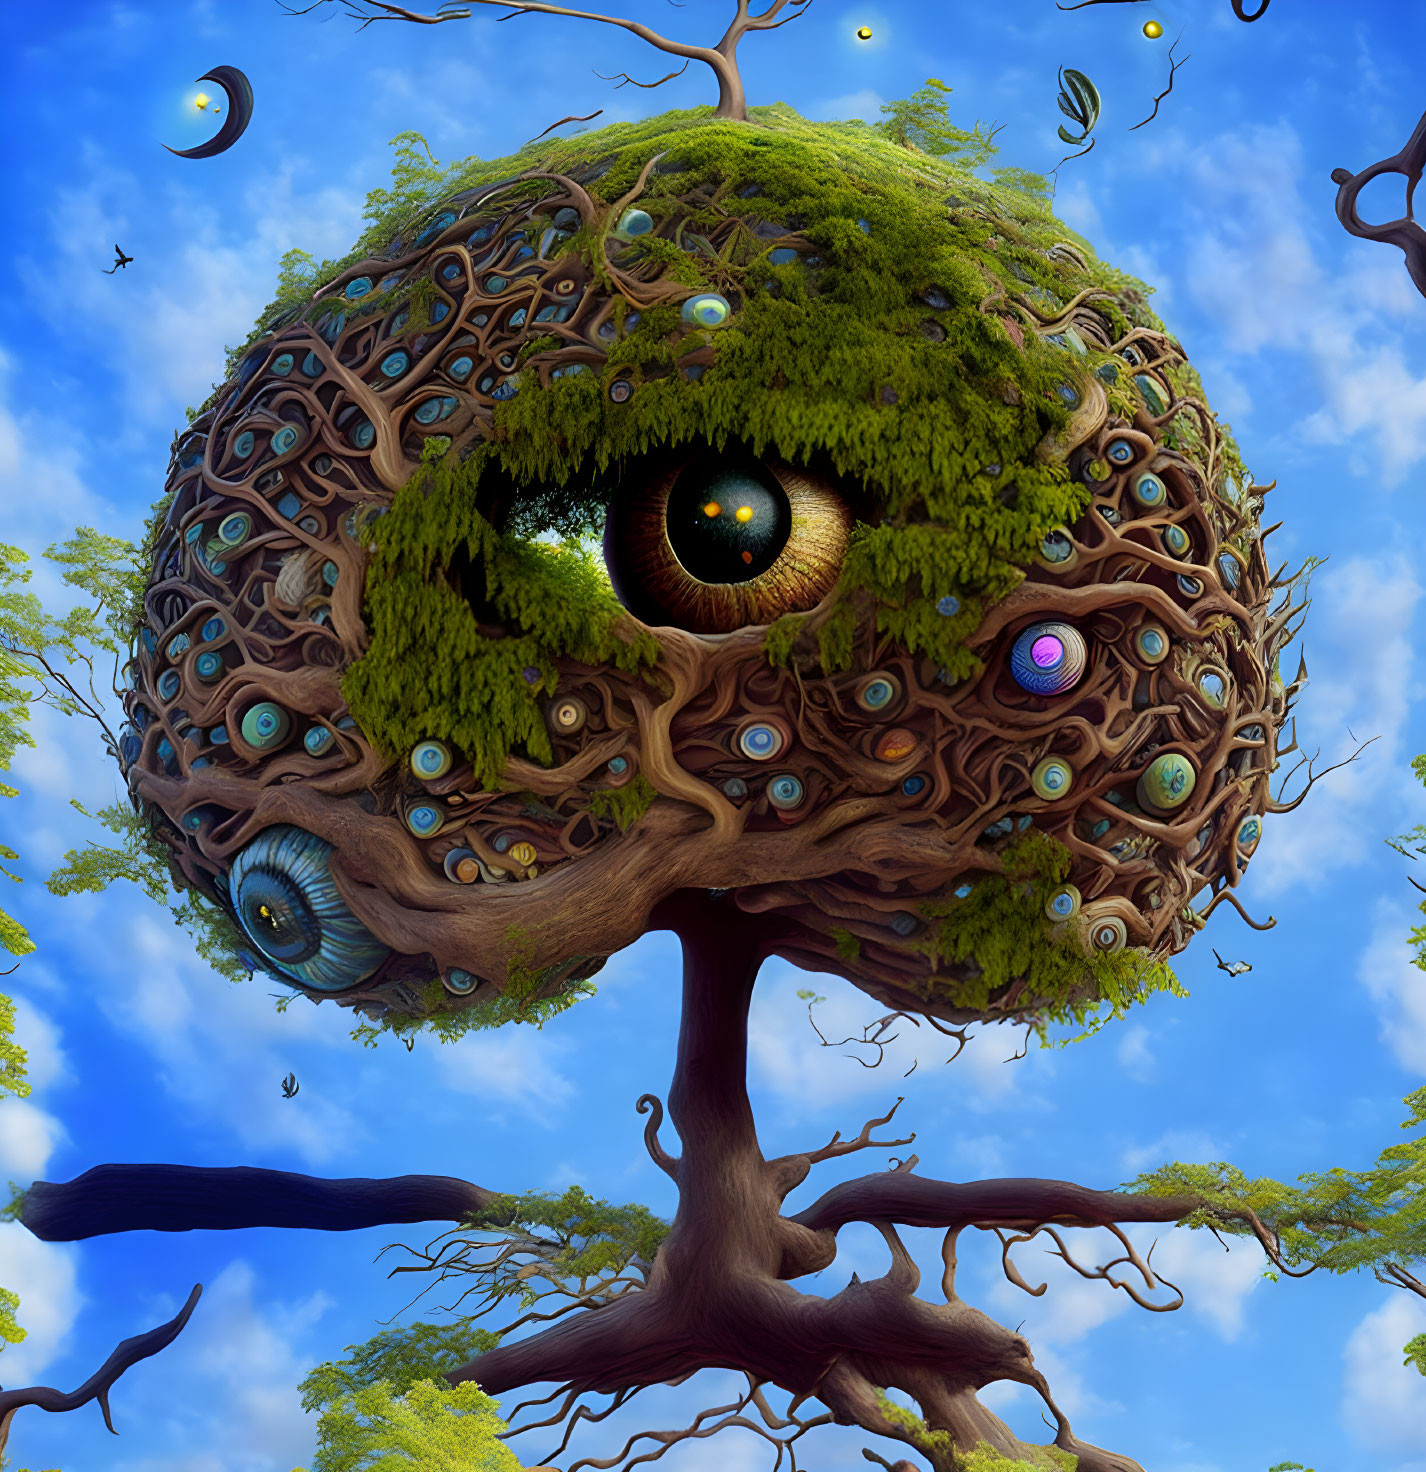 Whimsical tree with brain-shaped crown and multiple eyes against blue sky